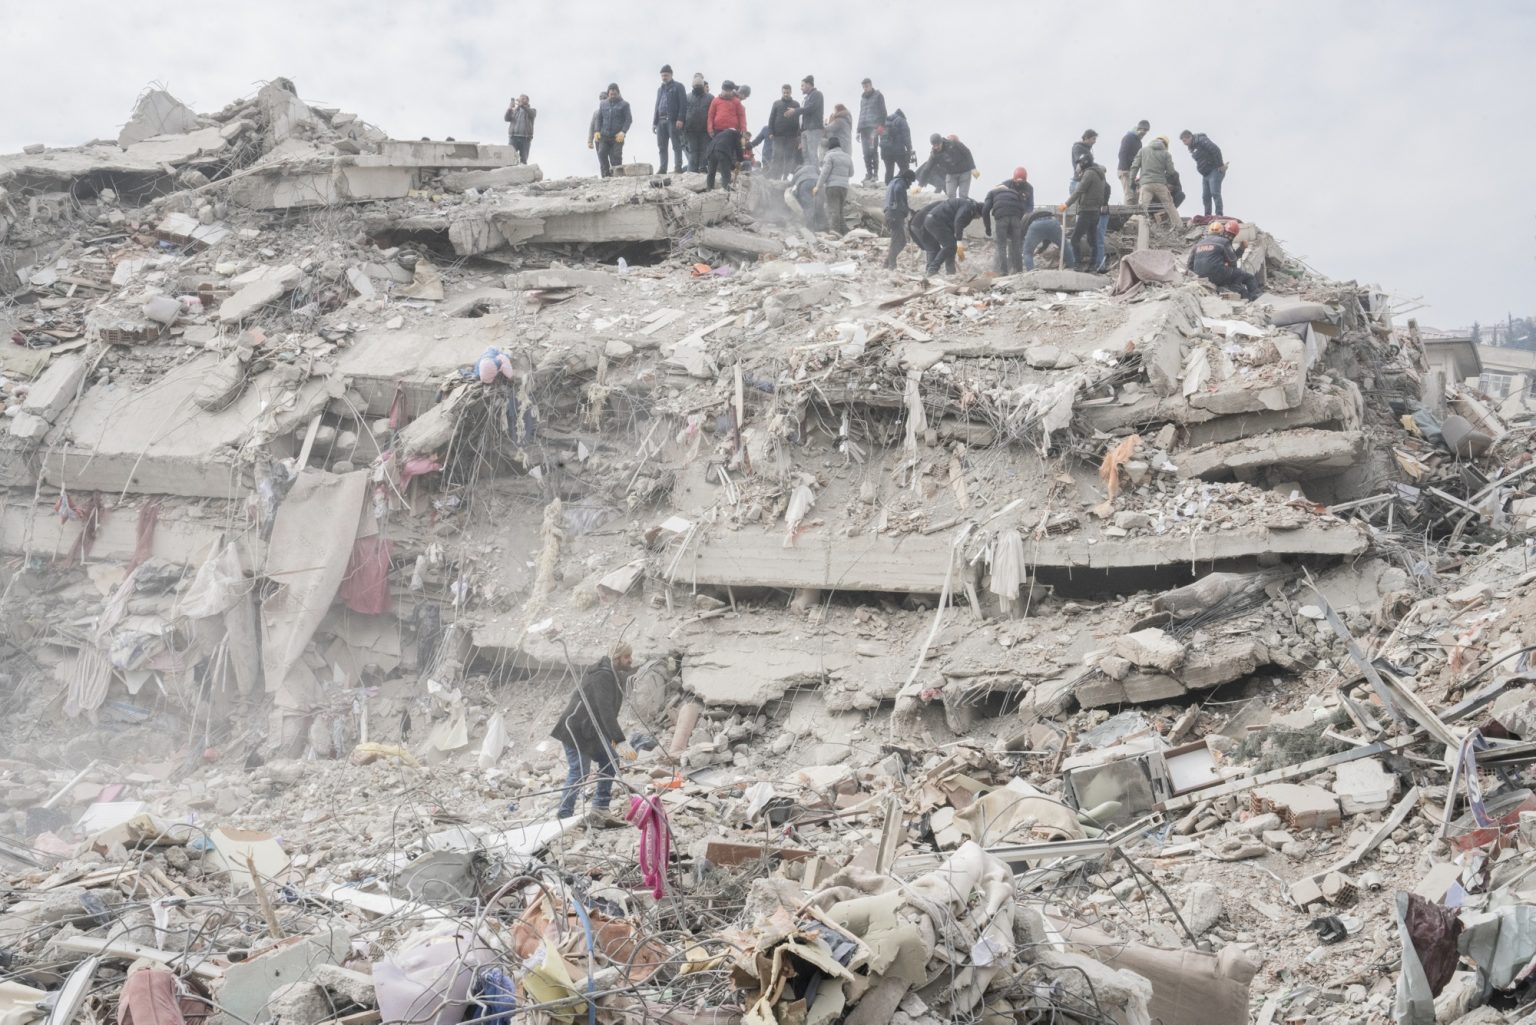 Kahramanmaras¸, Turkey, February 2023 - The aftermath of the earthquake that hit southern Turkey and northern Syria.     A collapsed building in the center of Kahramanmaras¸.  ><
Kahramanmaras¸, Turchia, febbraio 2023  Le conseguenze del terremoto che ha colpito la Turchia del Sud e la Siria del nord.